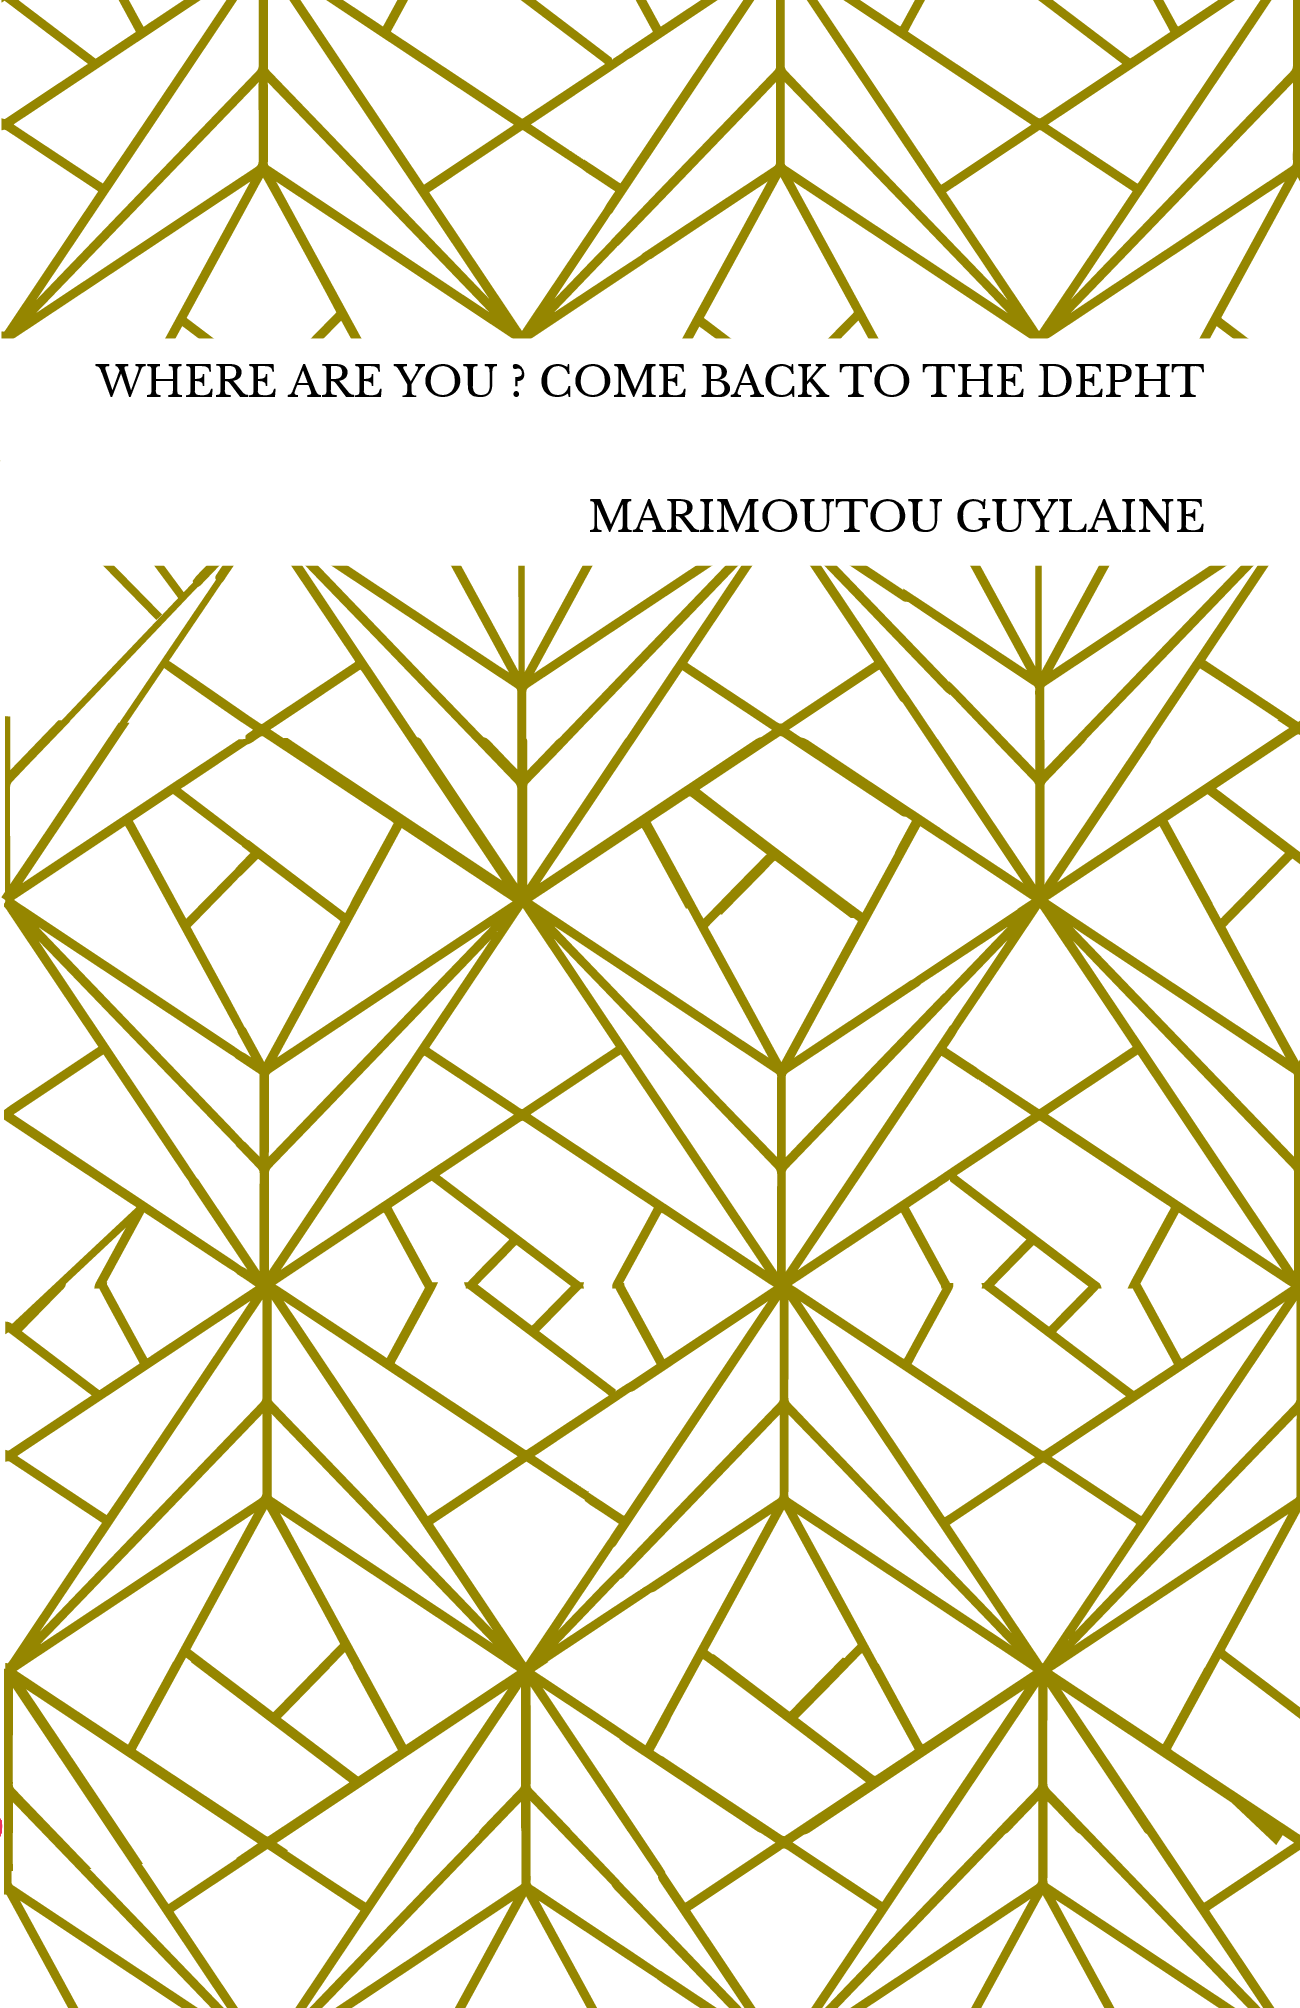 WHERE ARE YOU ? COME BACK TO THE DEPHT